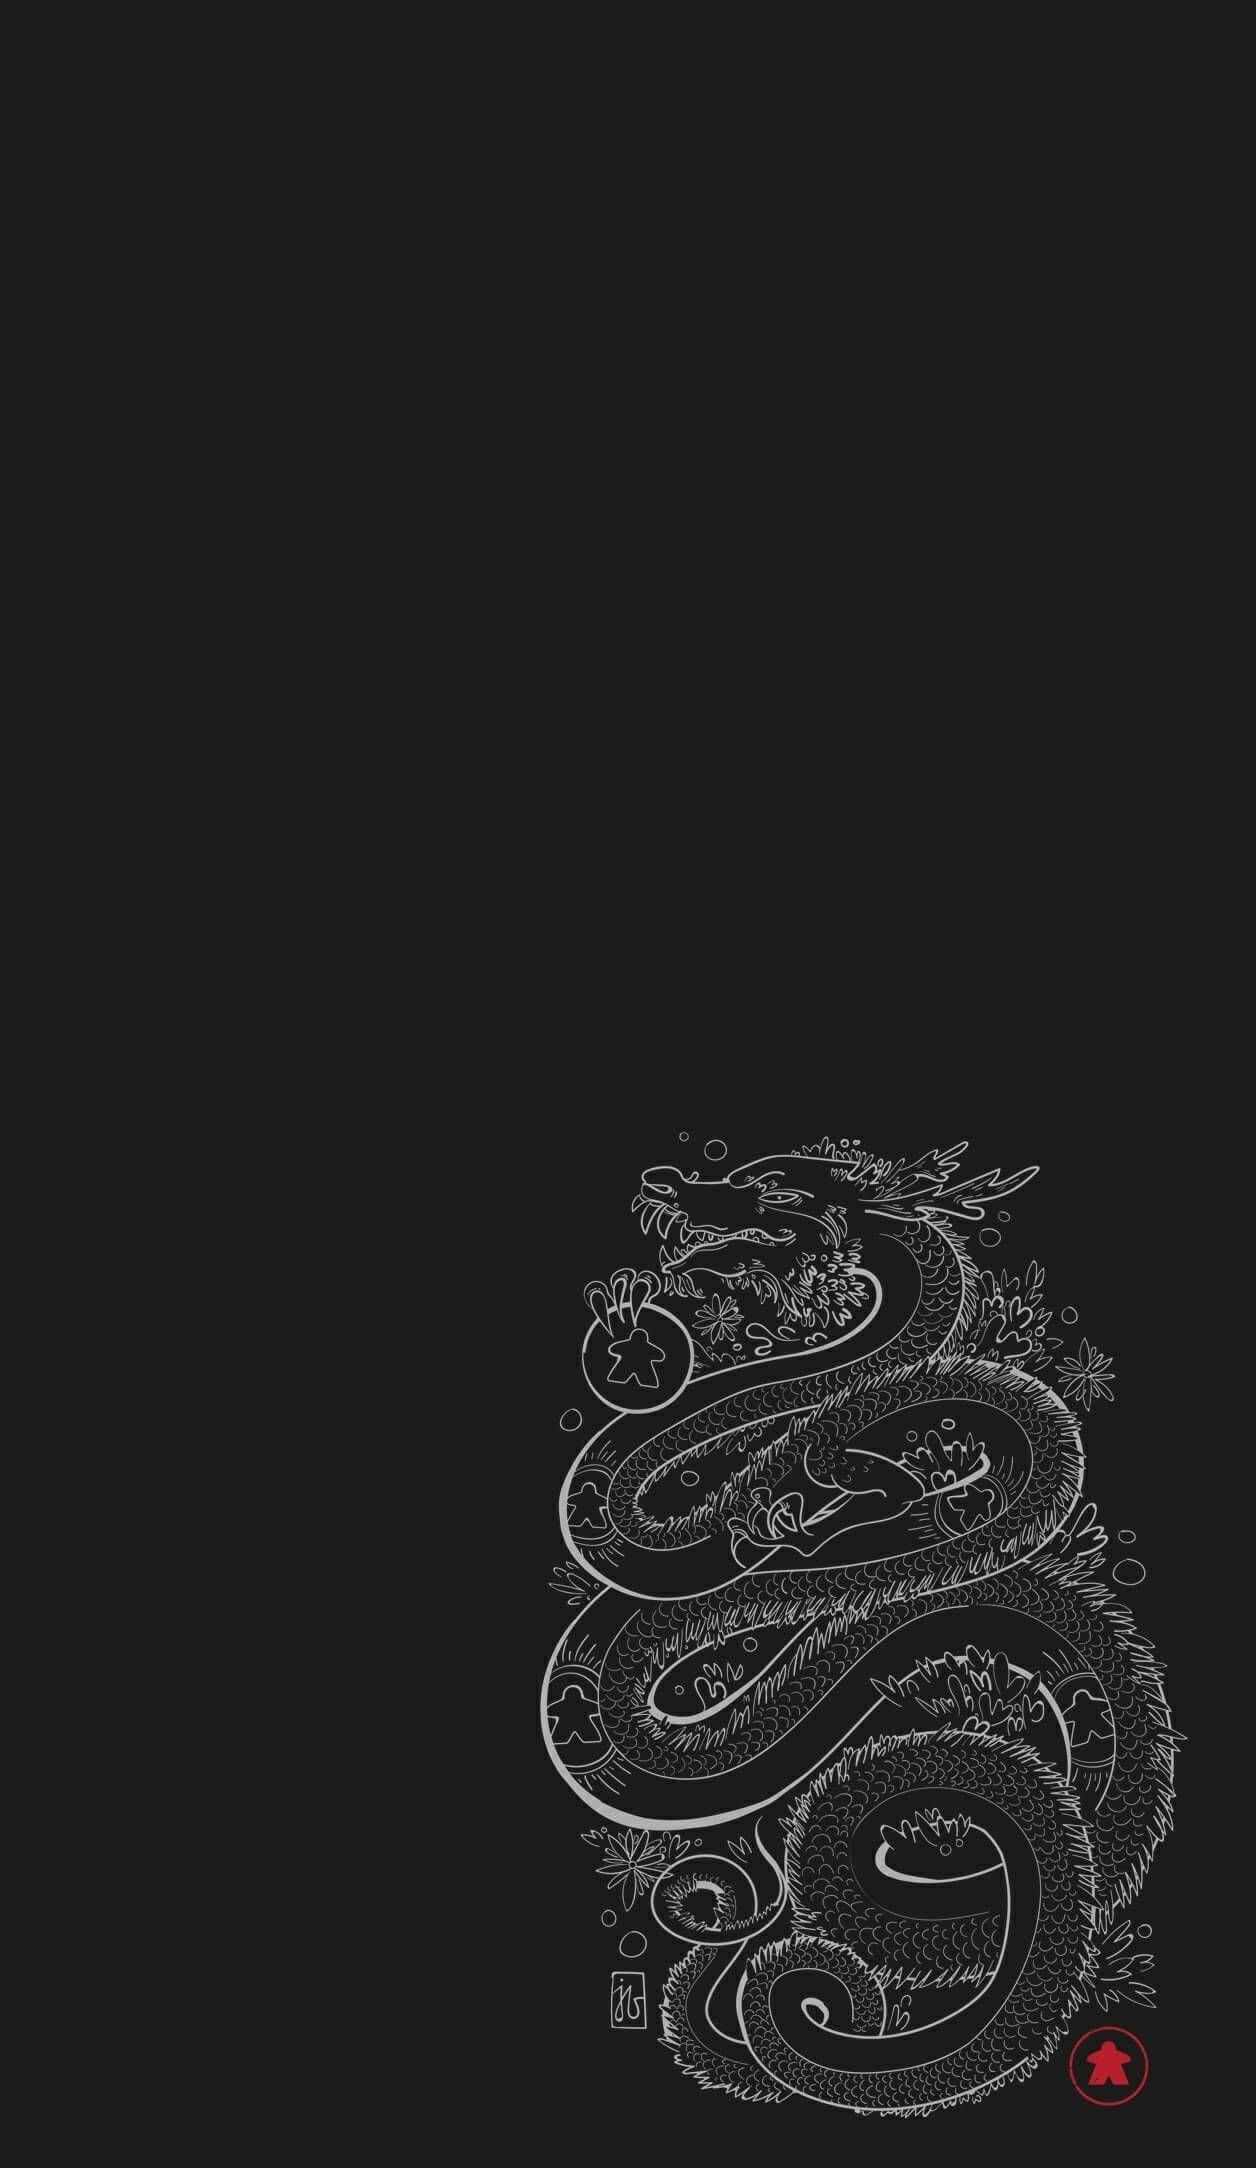 IPhone wallpaper with a black background and a white dragon. - Dragon